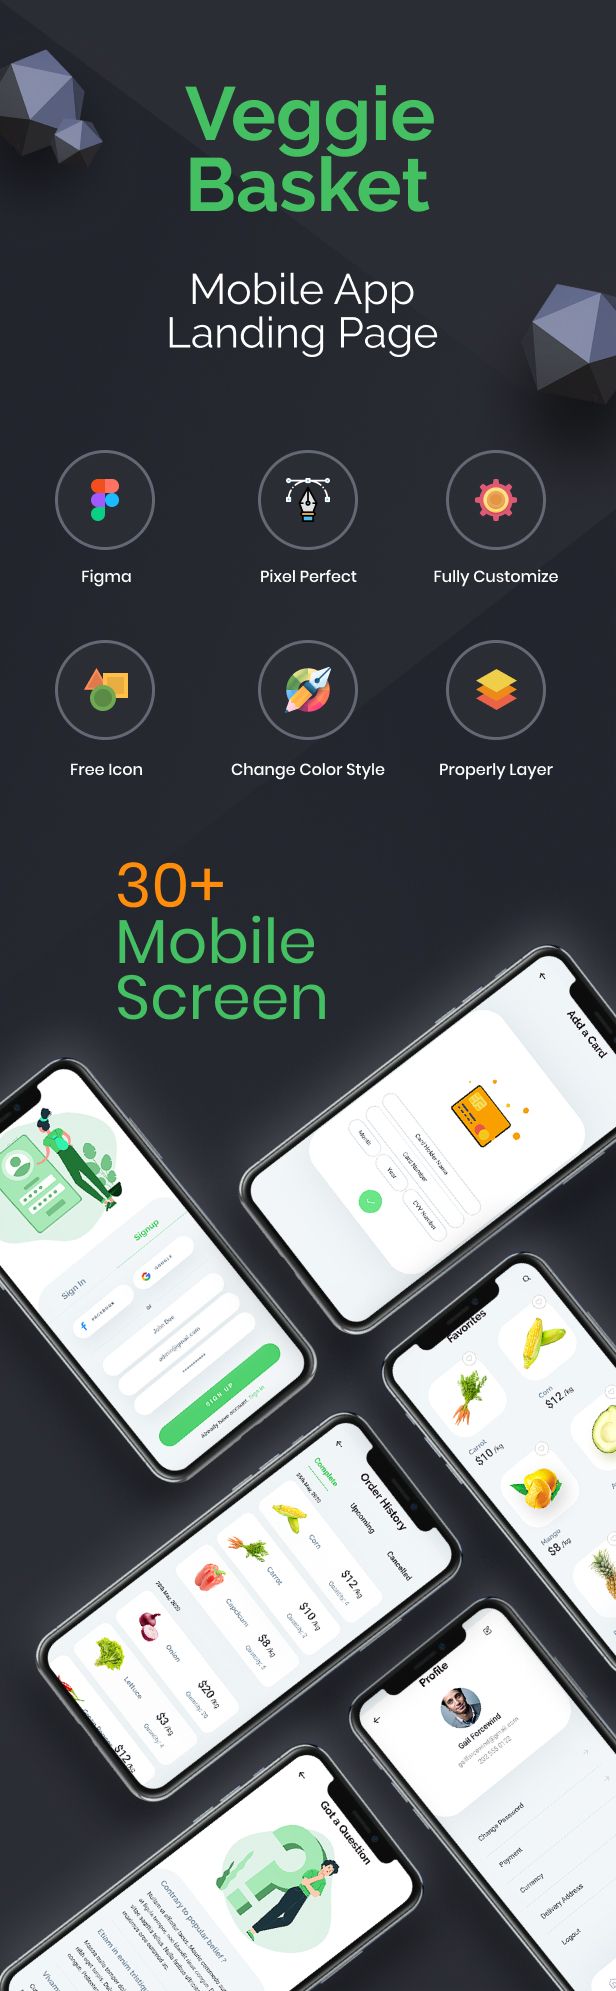 VeggieBasket | Mobile App and Landing Page An Online Vegetable and Grocery Figma Template - 1